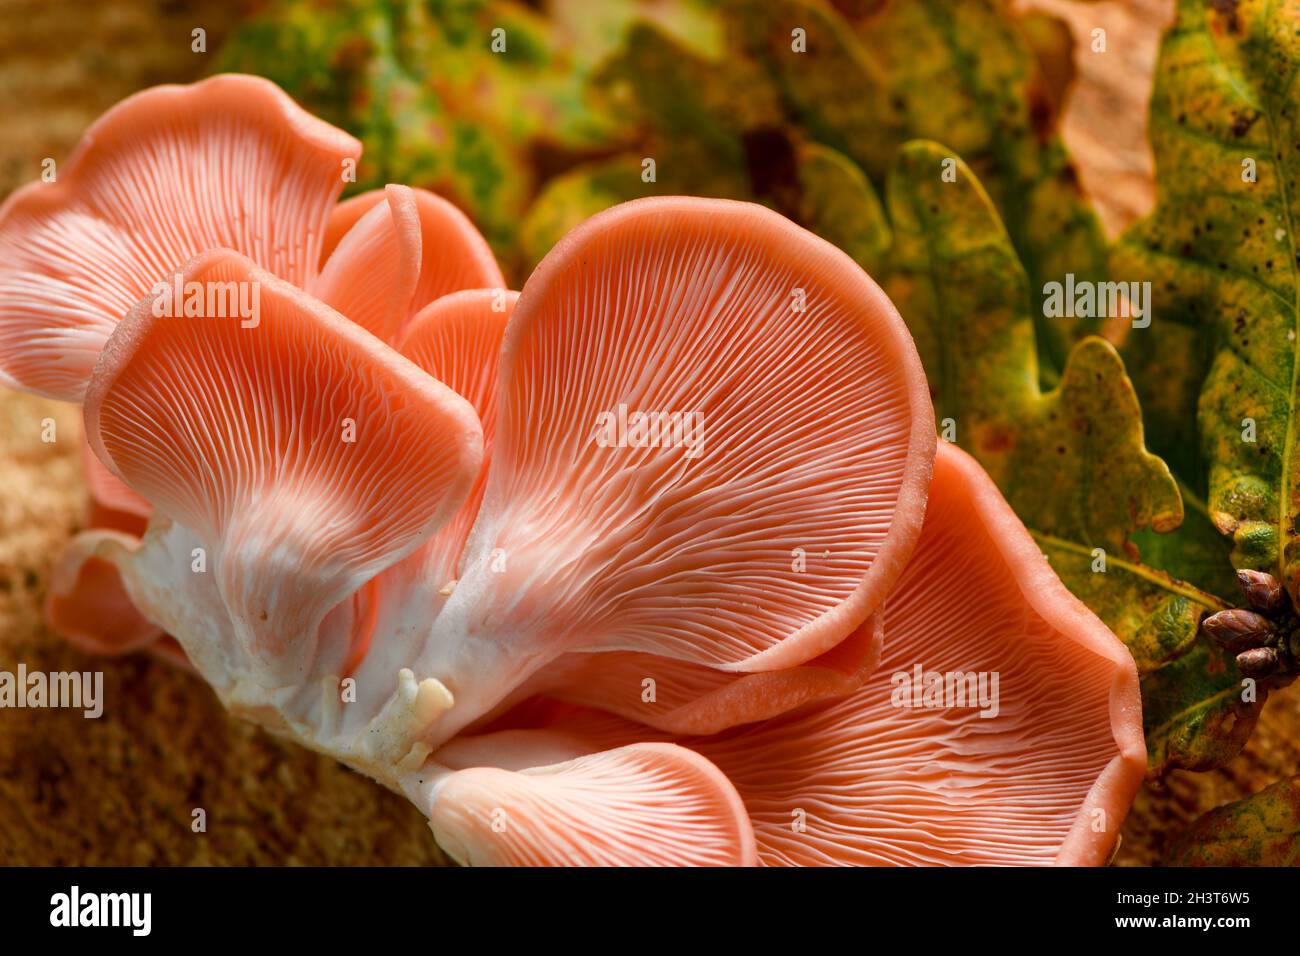 Pink oyster mushrooms shot from above on a forest autumnal background with oak leaves and tree wood with a hard penlight source picking out details. Stock Photo